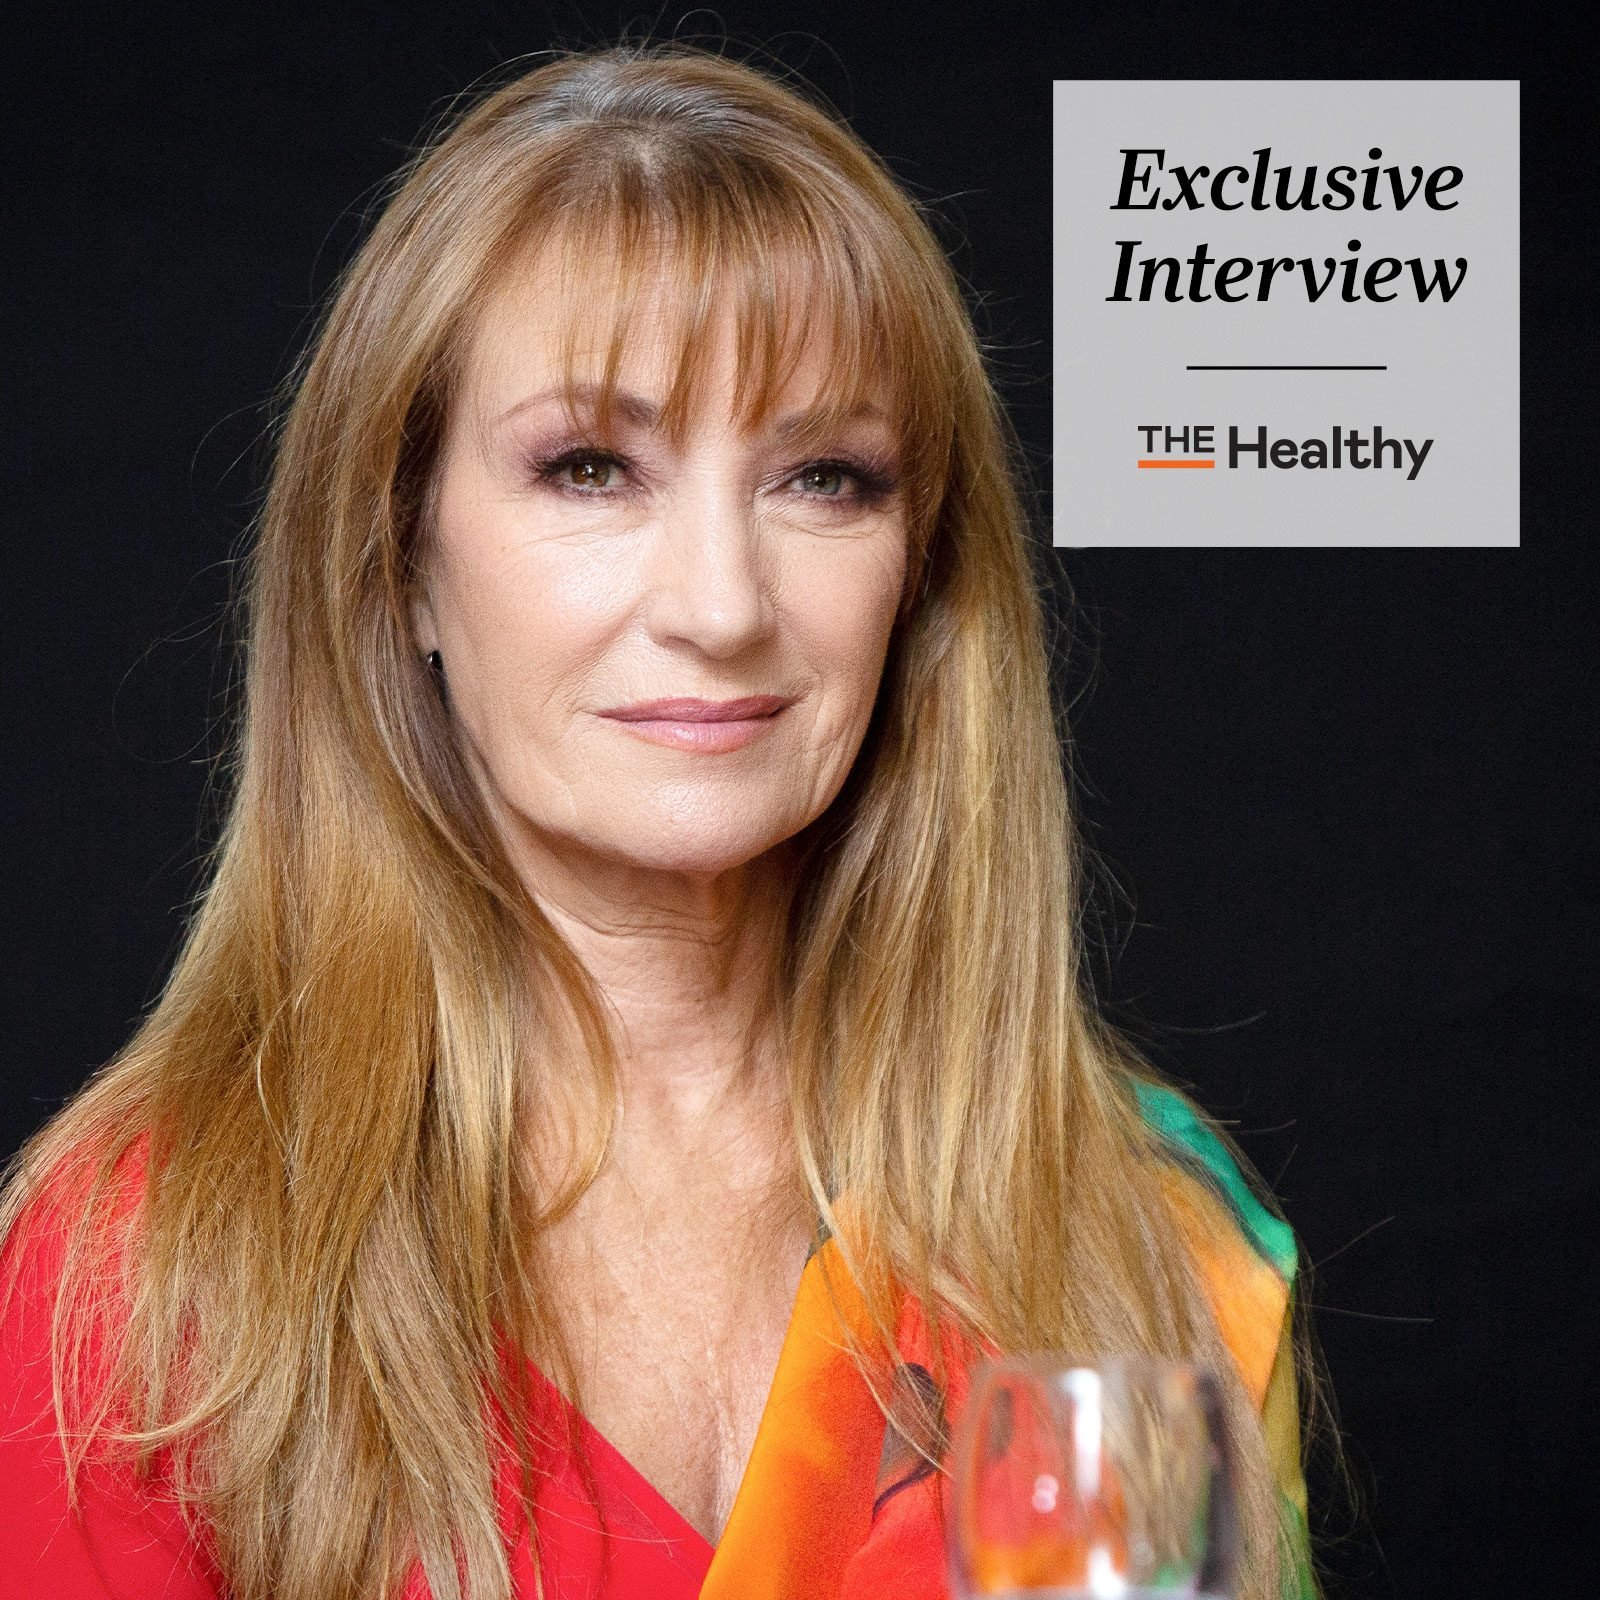 Actress Jane Seymour on the Effects of "Unseenism" and the #1 Way To Fight It: "Health Is Everything"